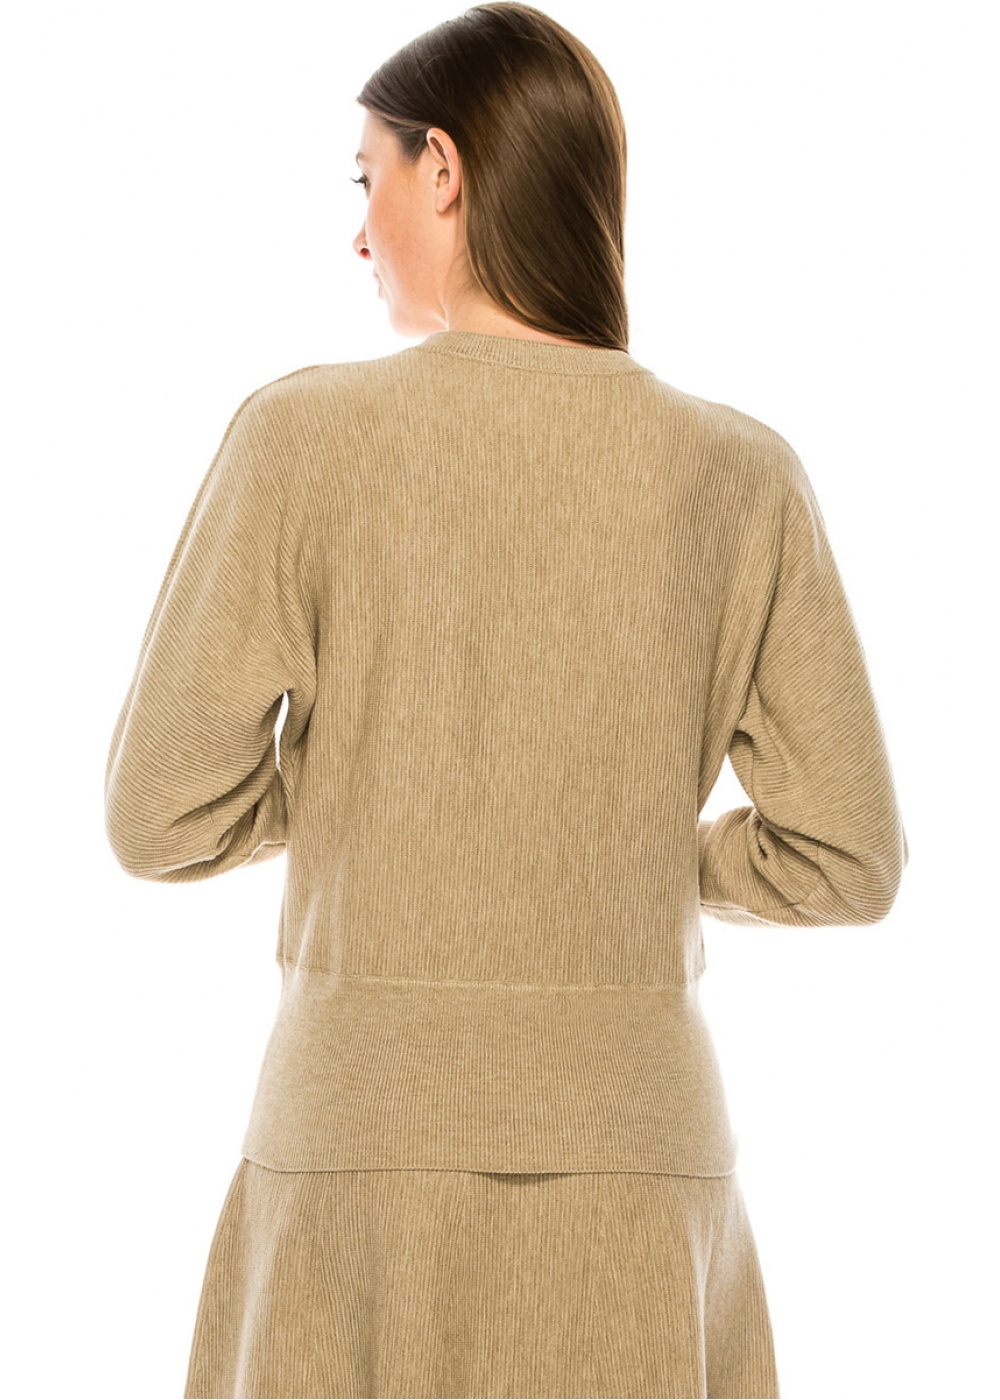 Slim sweater with voluminous sleeves in oatmeal